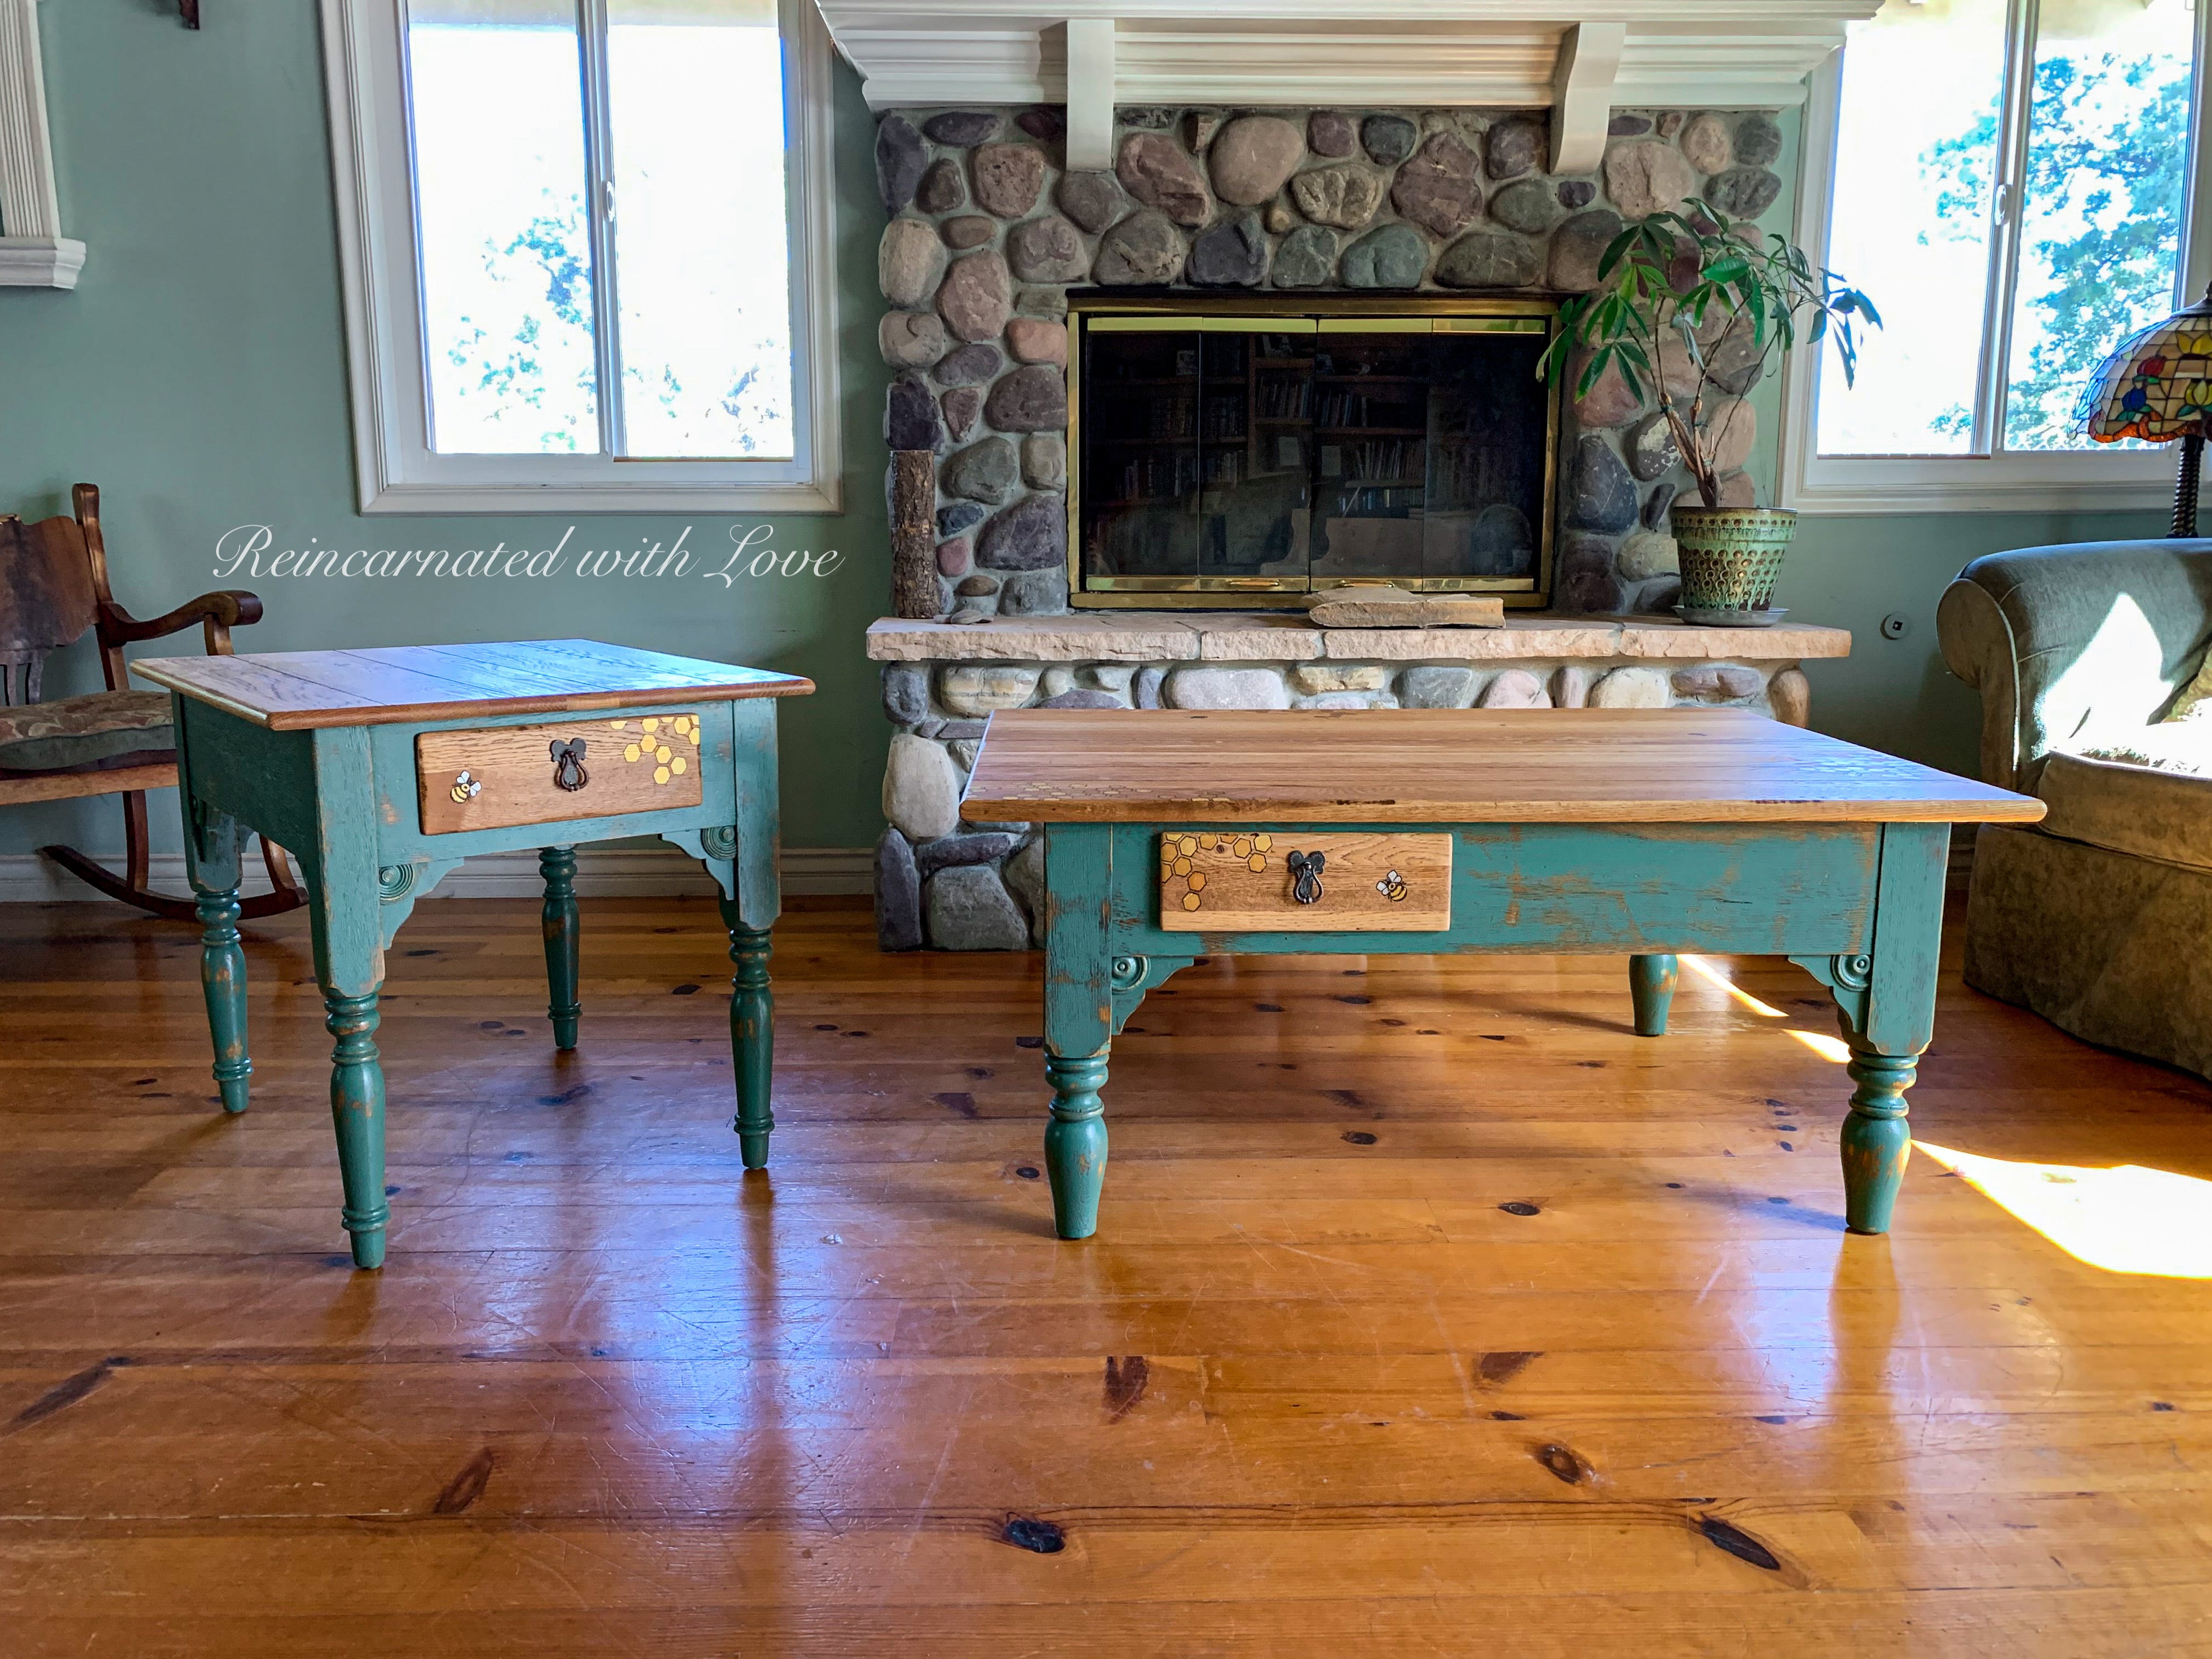 Matching coffee table and end table in distressed green and stained wood with honeycomb accents.